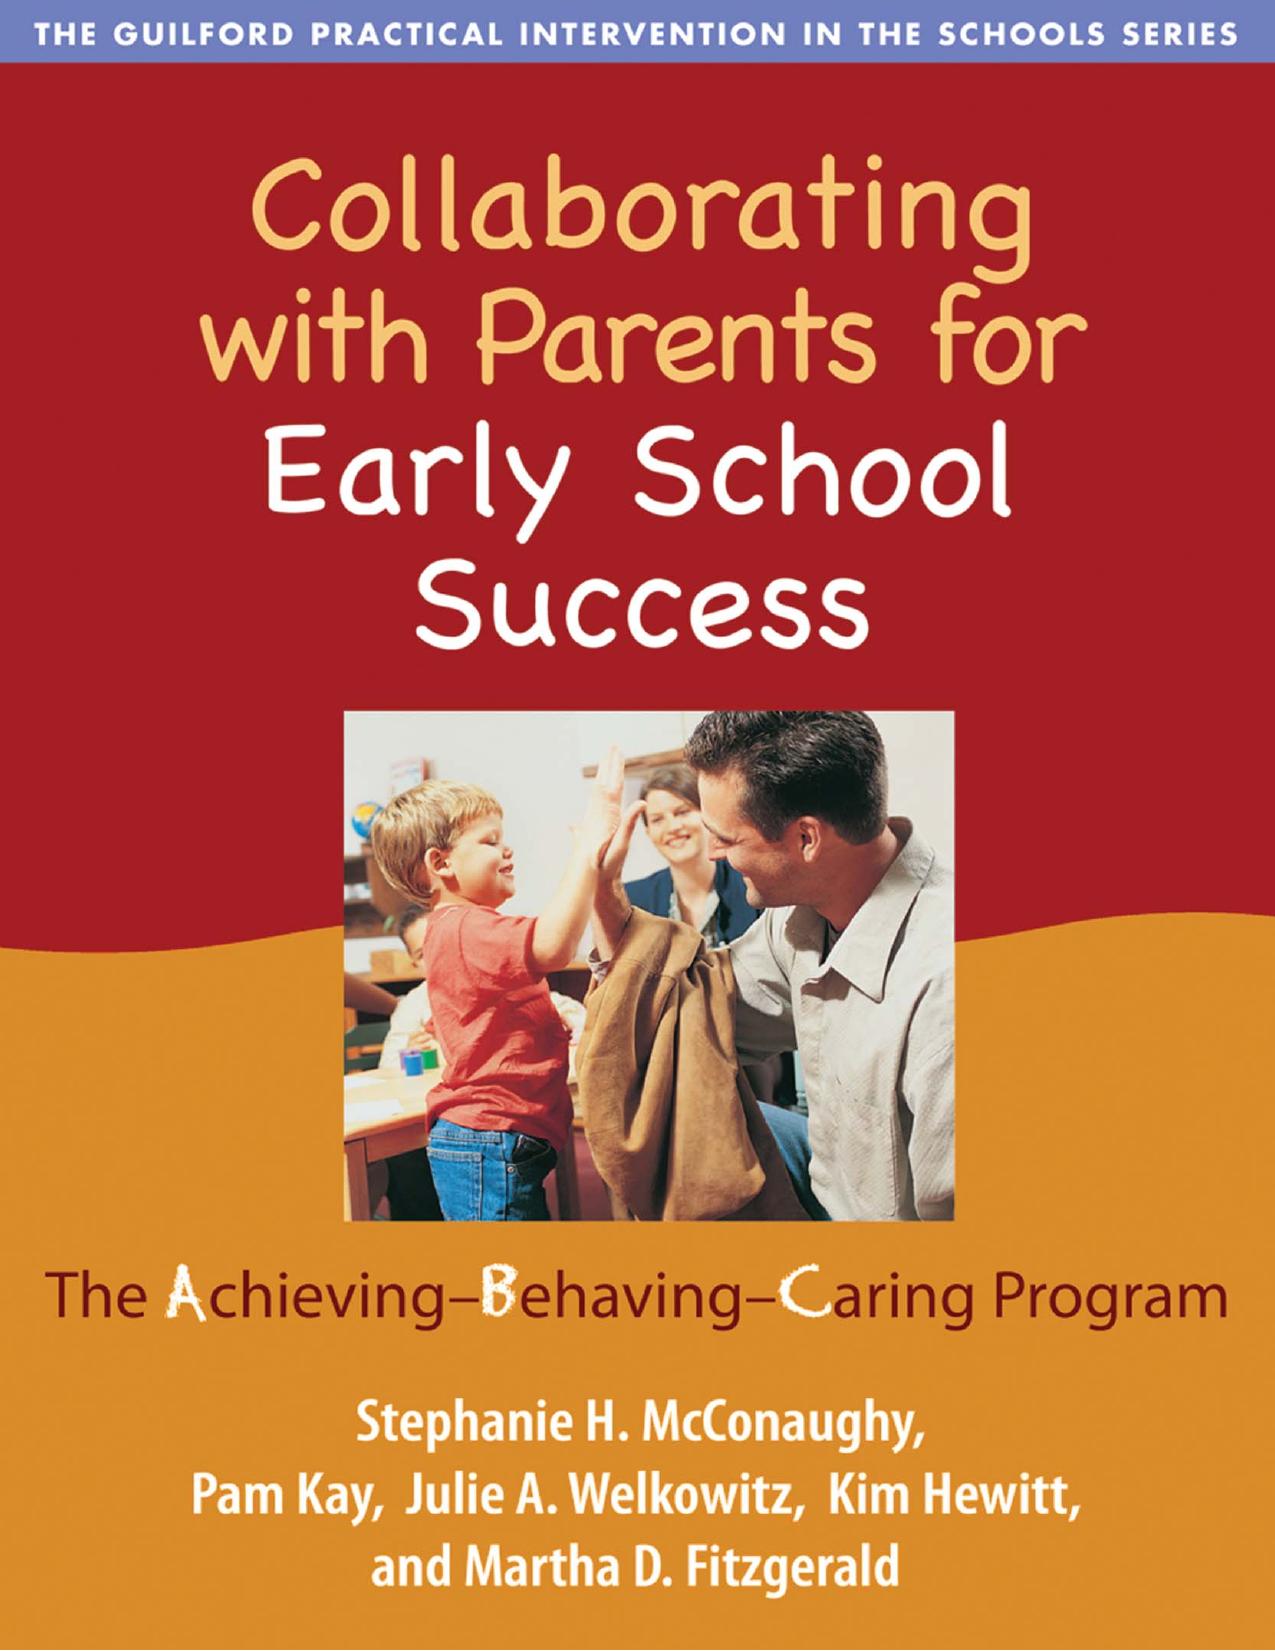 Collaborating with Parents for Early School Success : The Achieving-Behaving-Caring Program by Stephanie H. McConaughy; Pam Kay; Julie A. Welkowitz; Kim Hewitt; Martha D. Fitzgerald